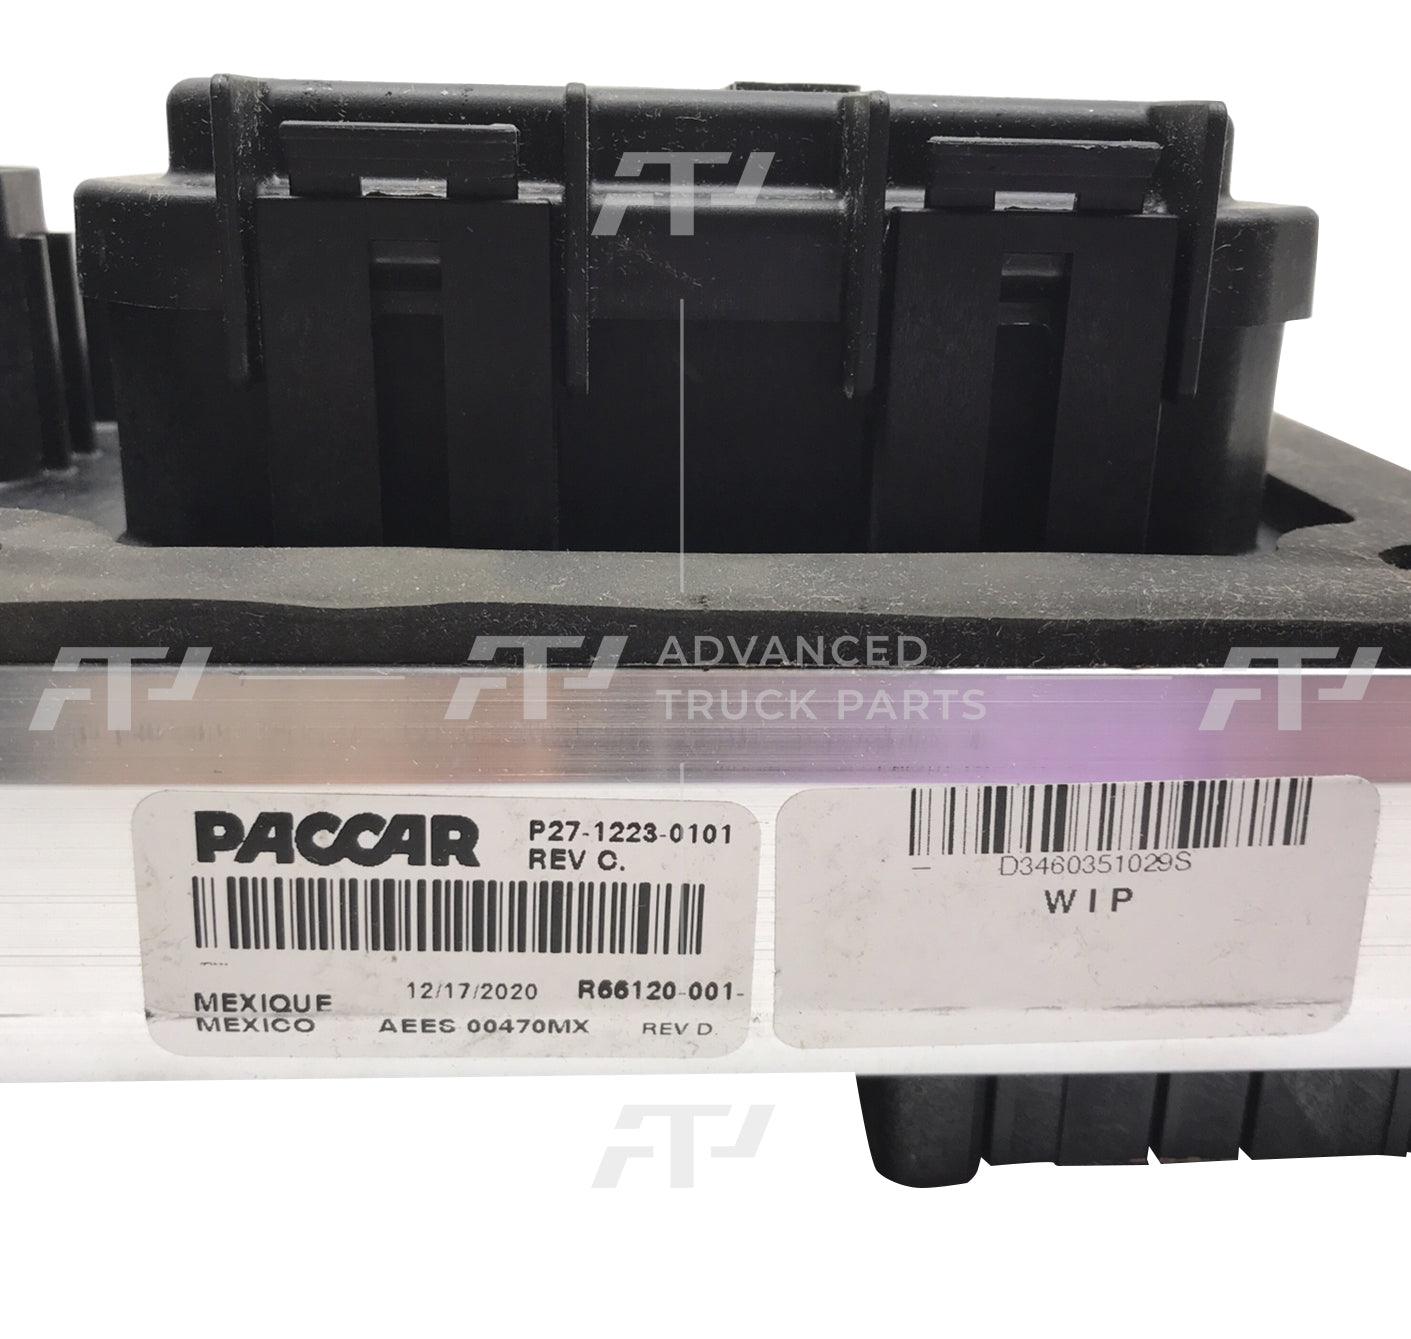 P27-1223-0101 Genuine Paccar® Fuse Block Assembly Cab Pdc 2.1M - ADVANCED TRUCK PARTS